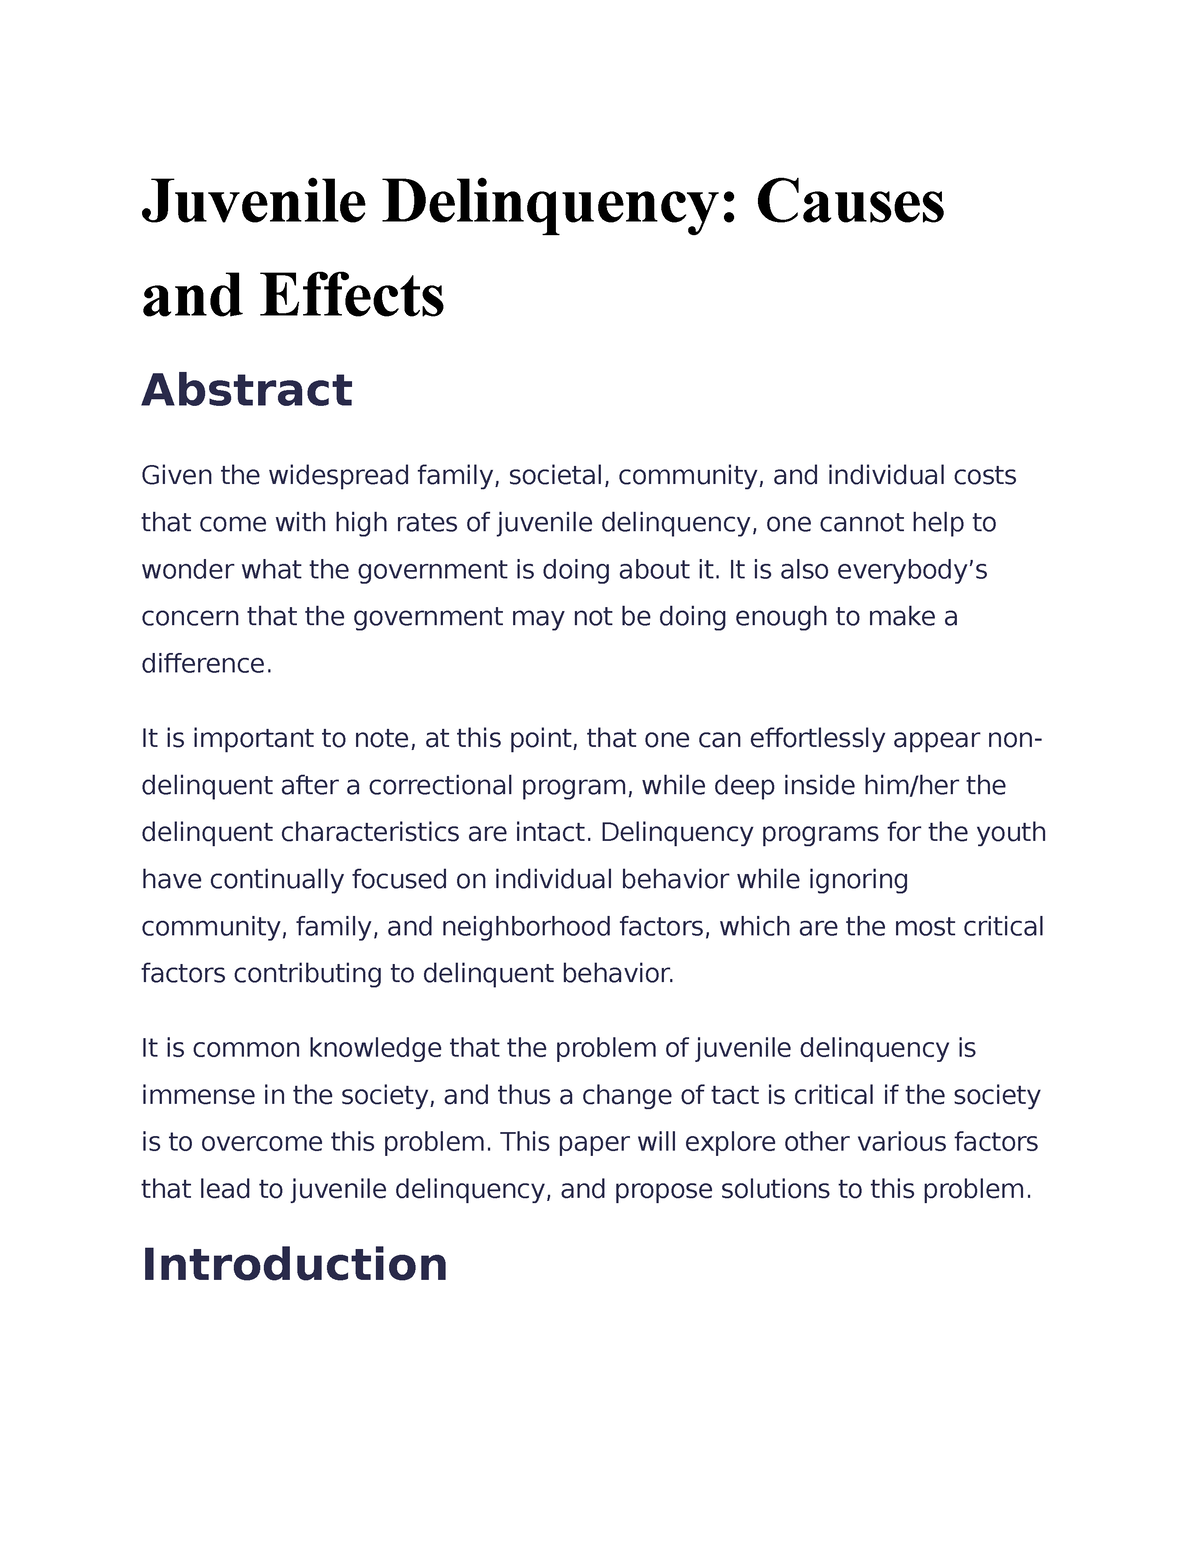 research on juvenile delinquency would be regarded as interpretive if it